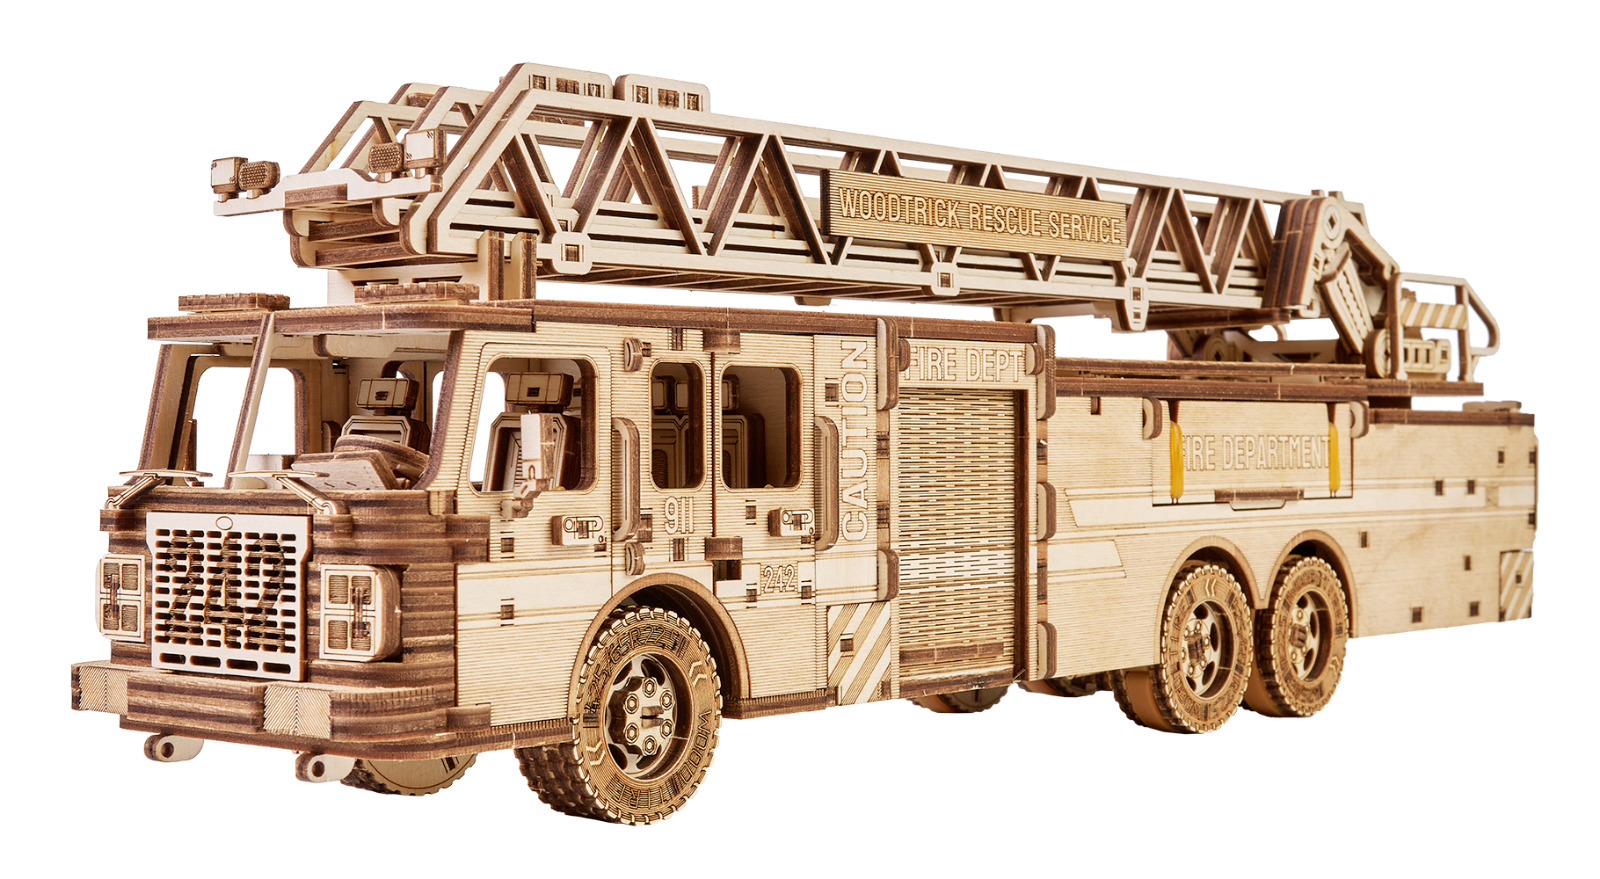 Wood Trick Rescue Firetruck Wooden 3d Mechanical Model Kit Puzzle Toy DIY Gift